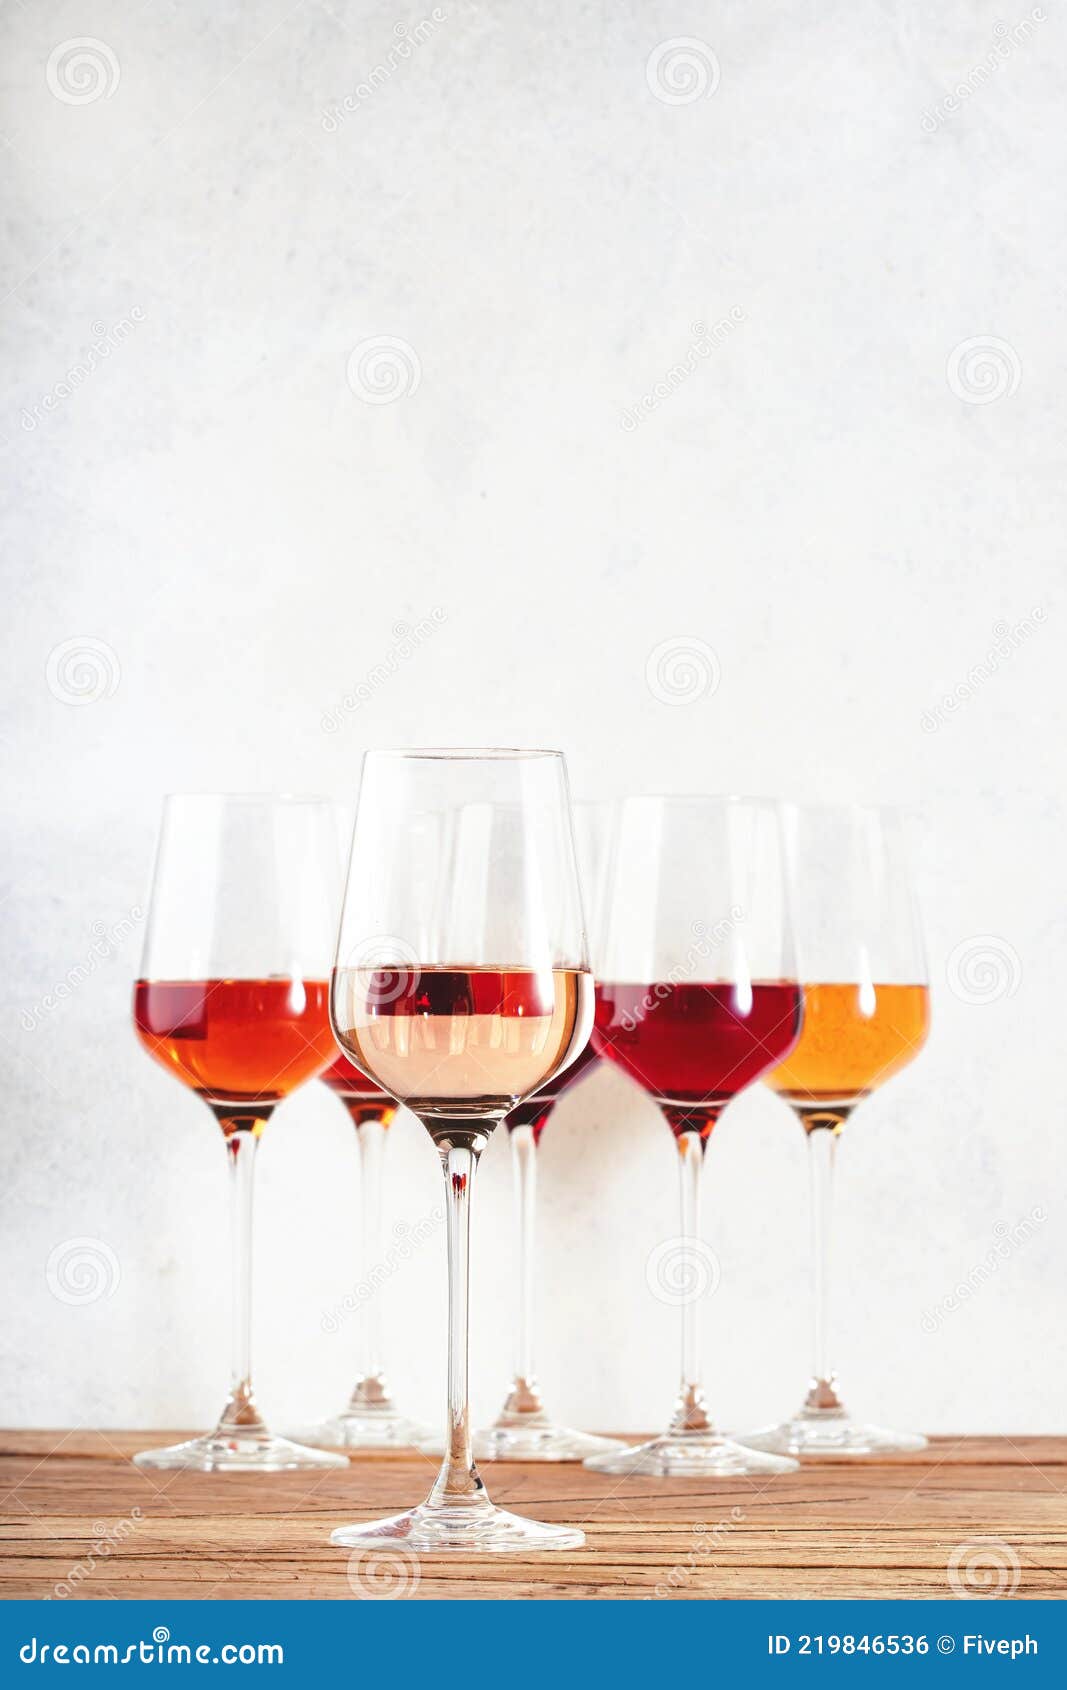 rose wine glasses set on wine tasting. different varieties, colors and shades of pink wines on white background